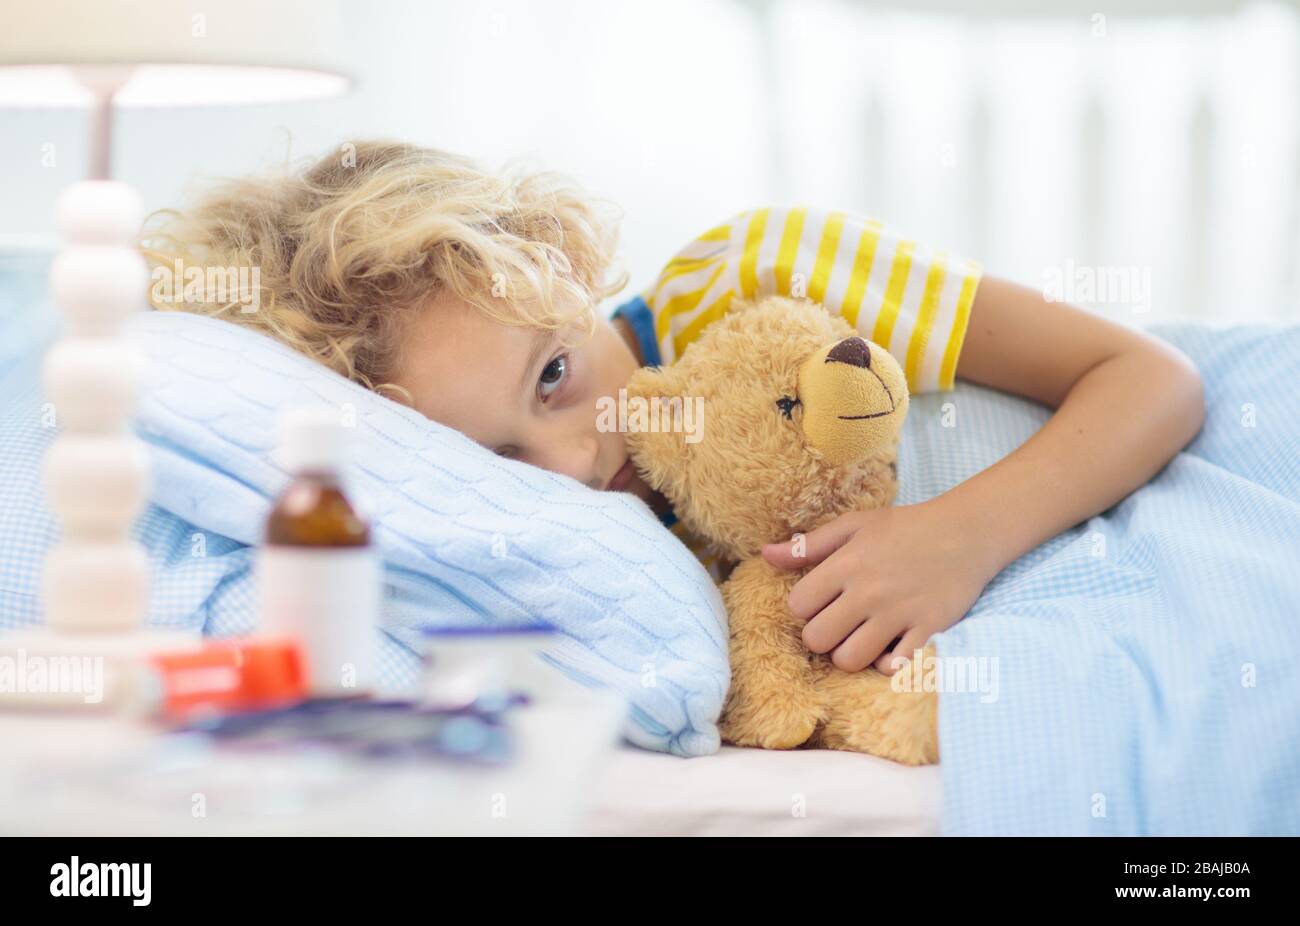 Sick little boy with asthma medicine. Ill child lying in bed. Unwell kid with chamber inhaler for cough treatment. Flu season. Bedroom or hospital roo Stock Photo